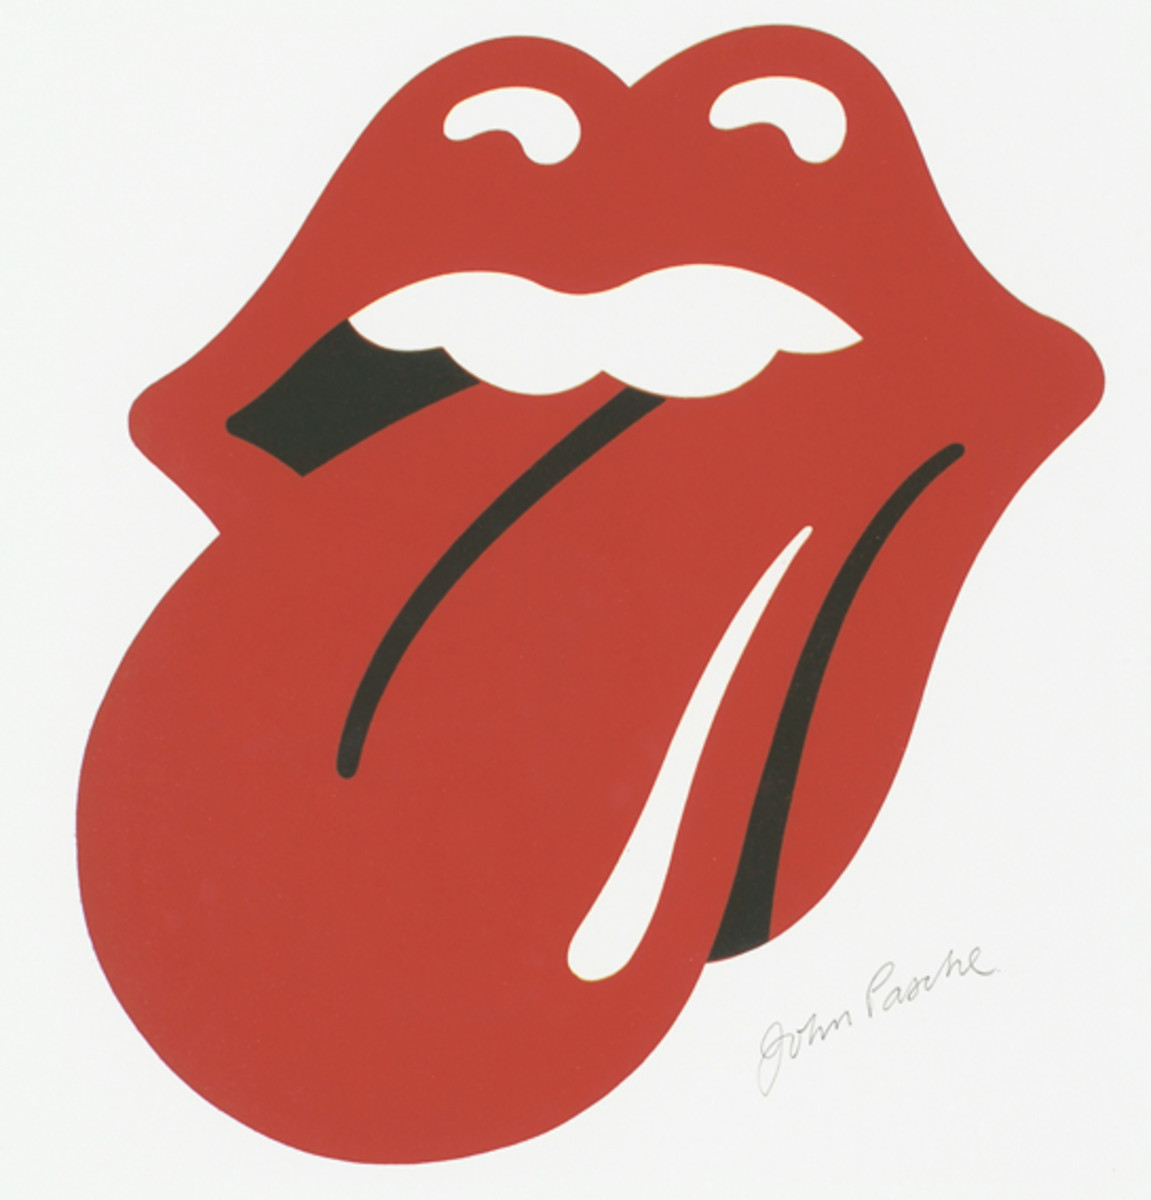 Rolling Stones logo by John Pasche